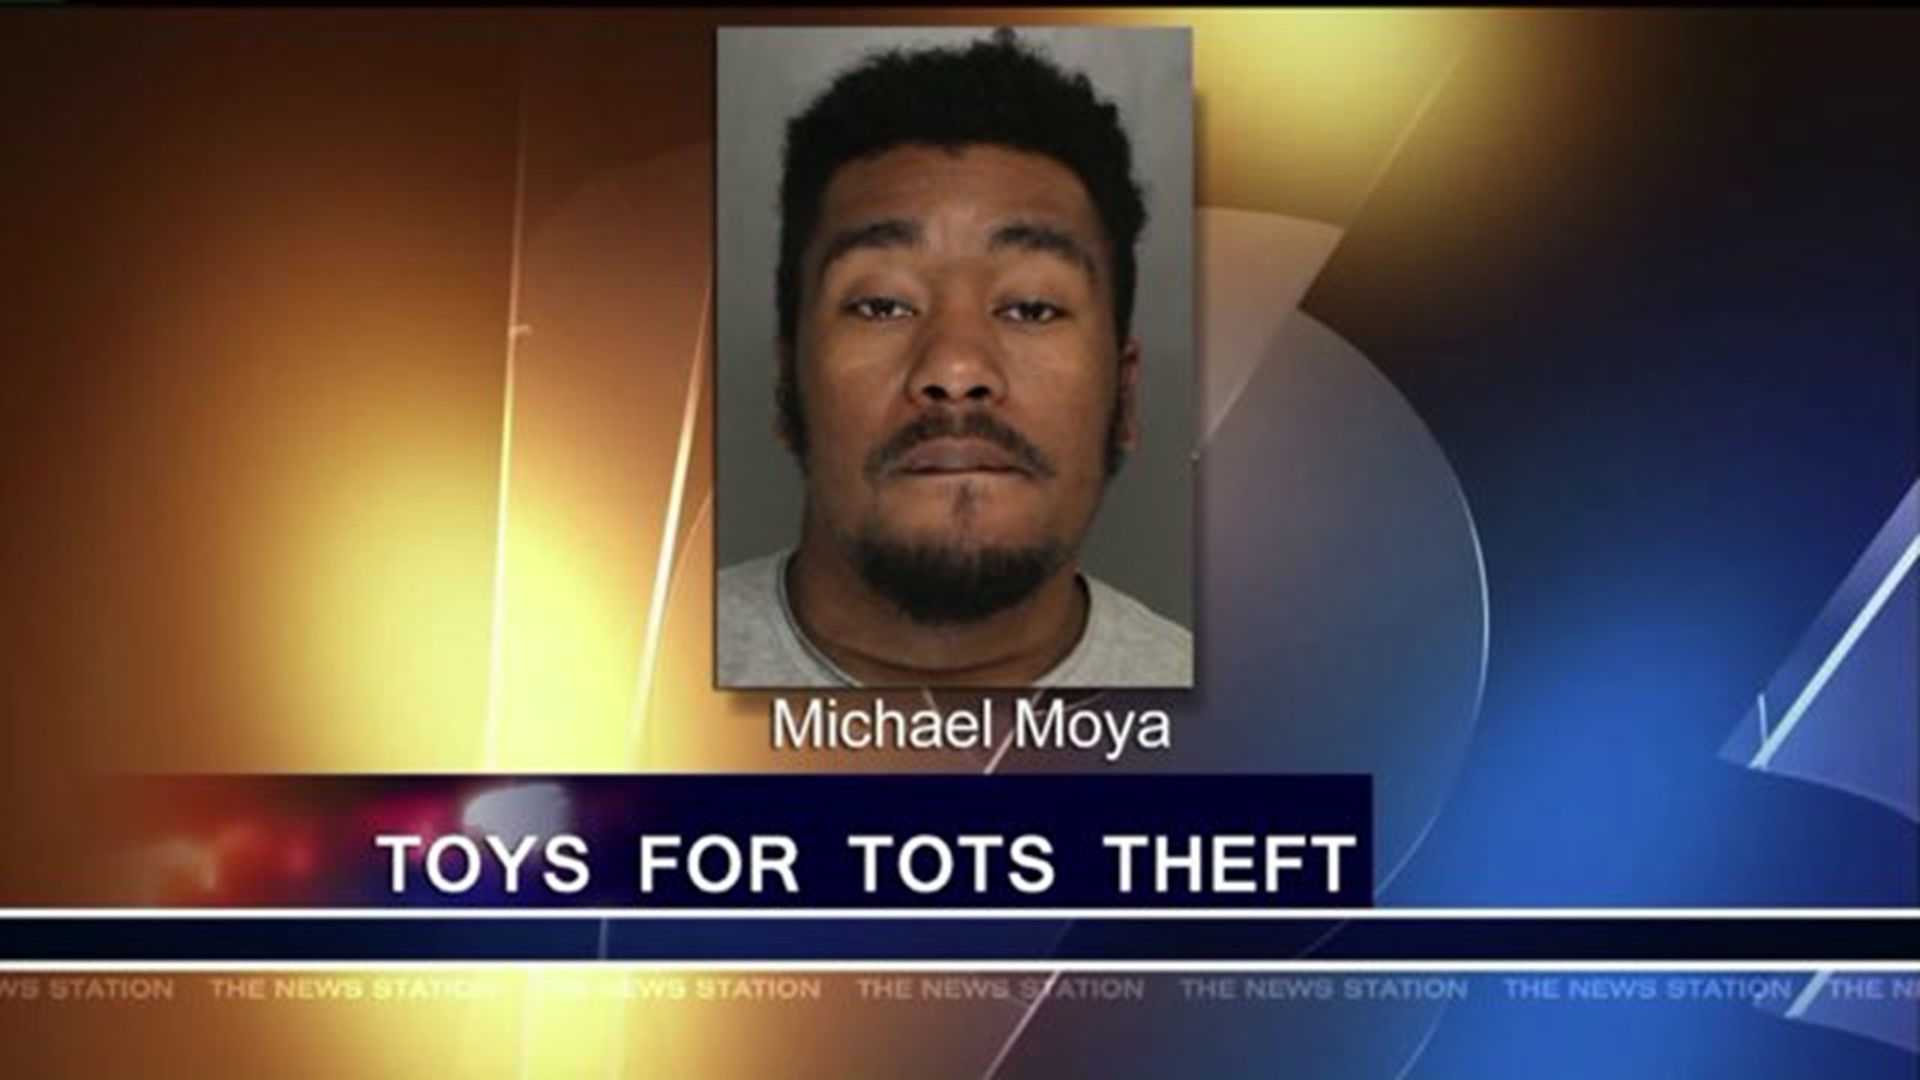 Suspected Toys For Tots Thief Nabbed in Monroe County